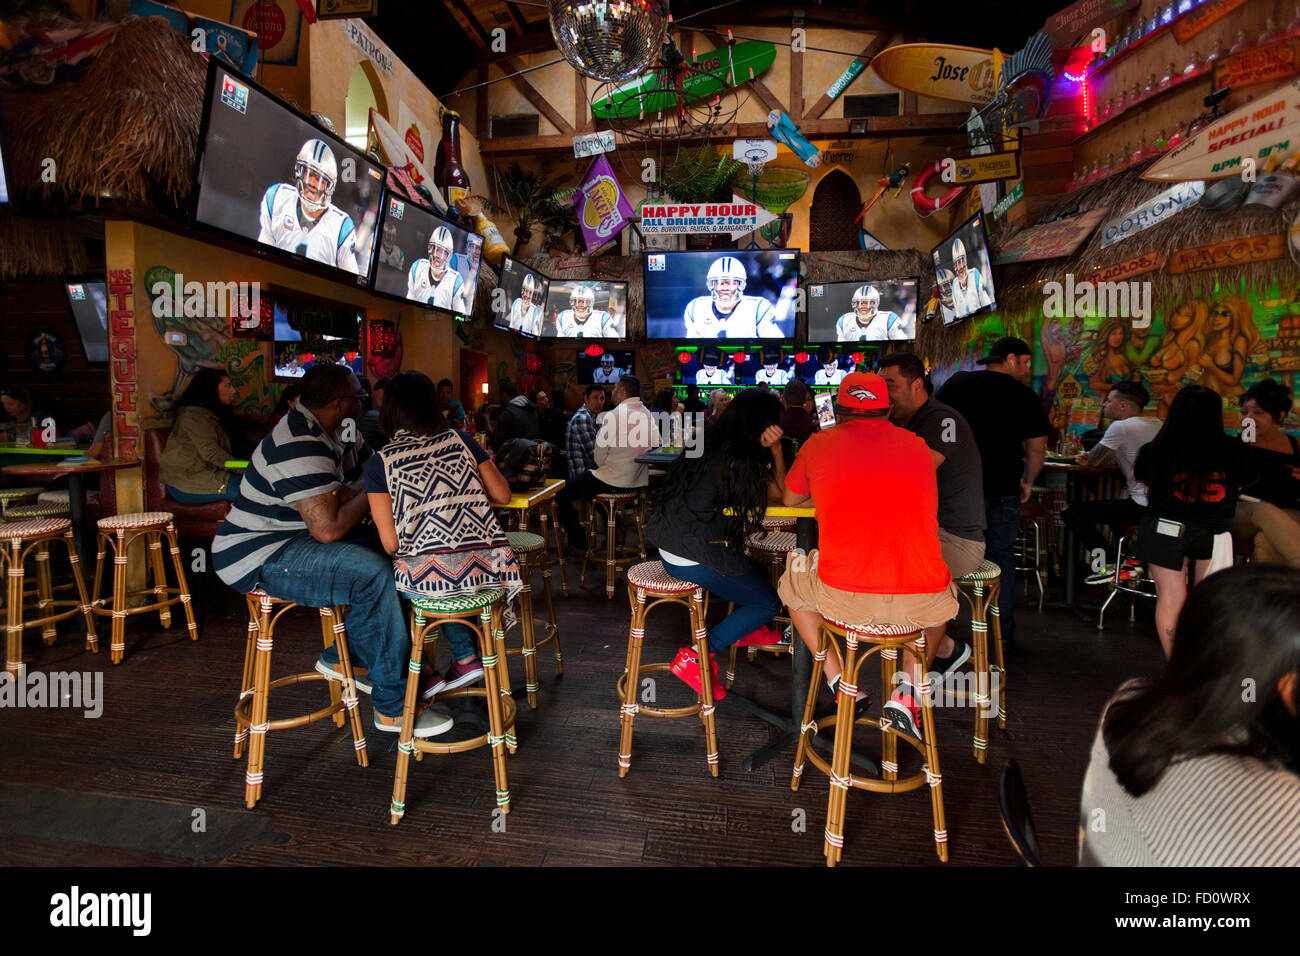 Watching the NFL playoffs in a restaurant - Cabo Cantina - on Hollywood Boulevard, Hollywood, Los Angeles, California, USA Stock Photo